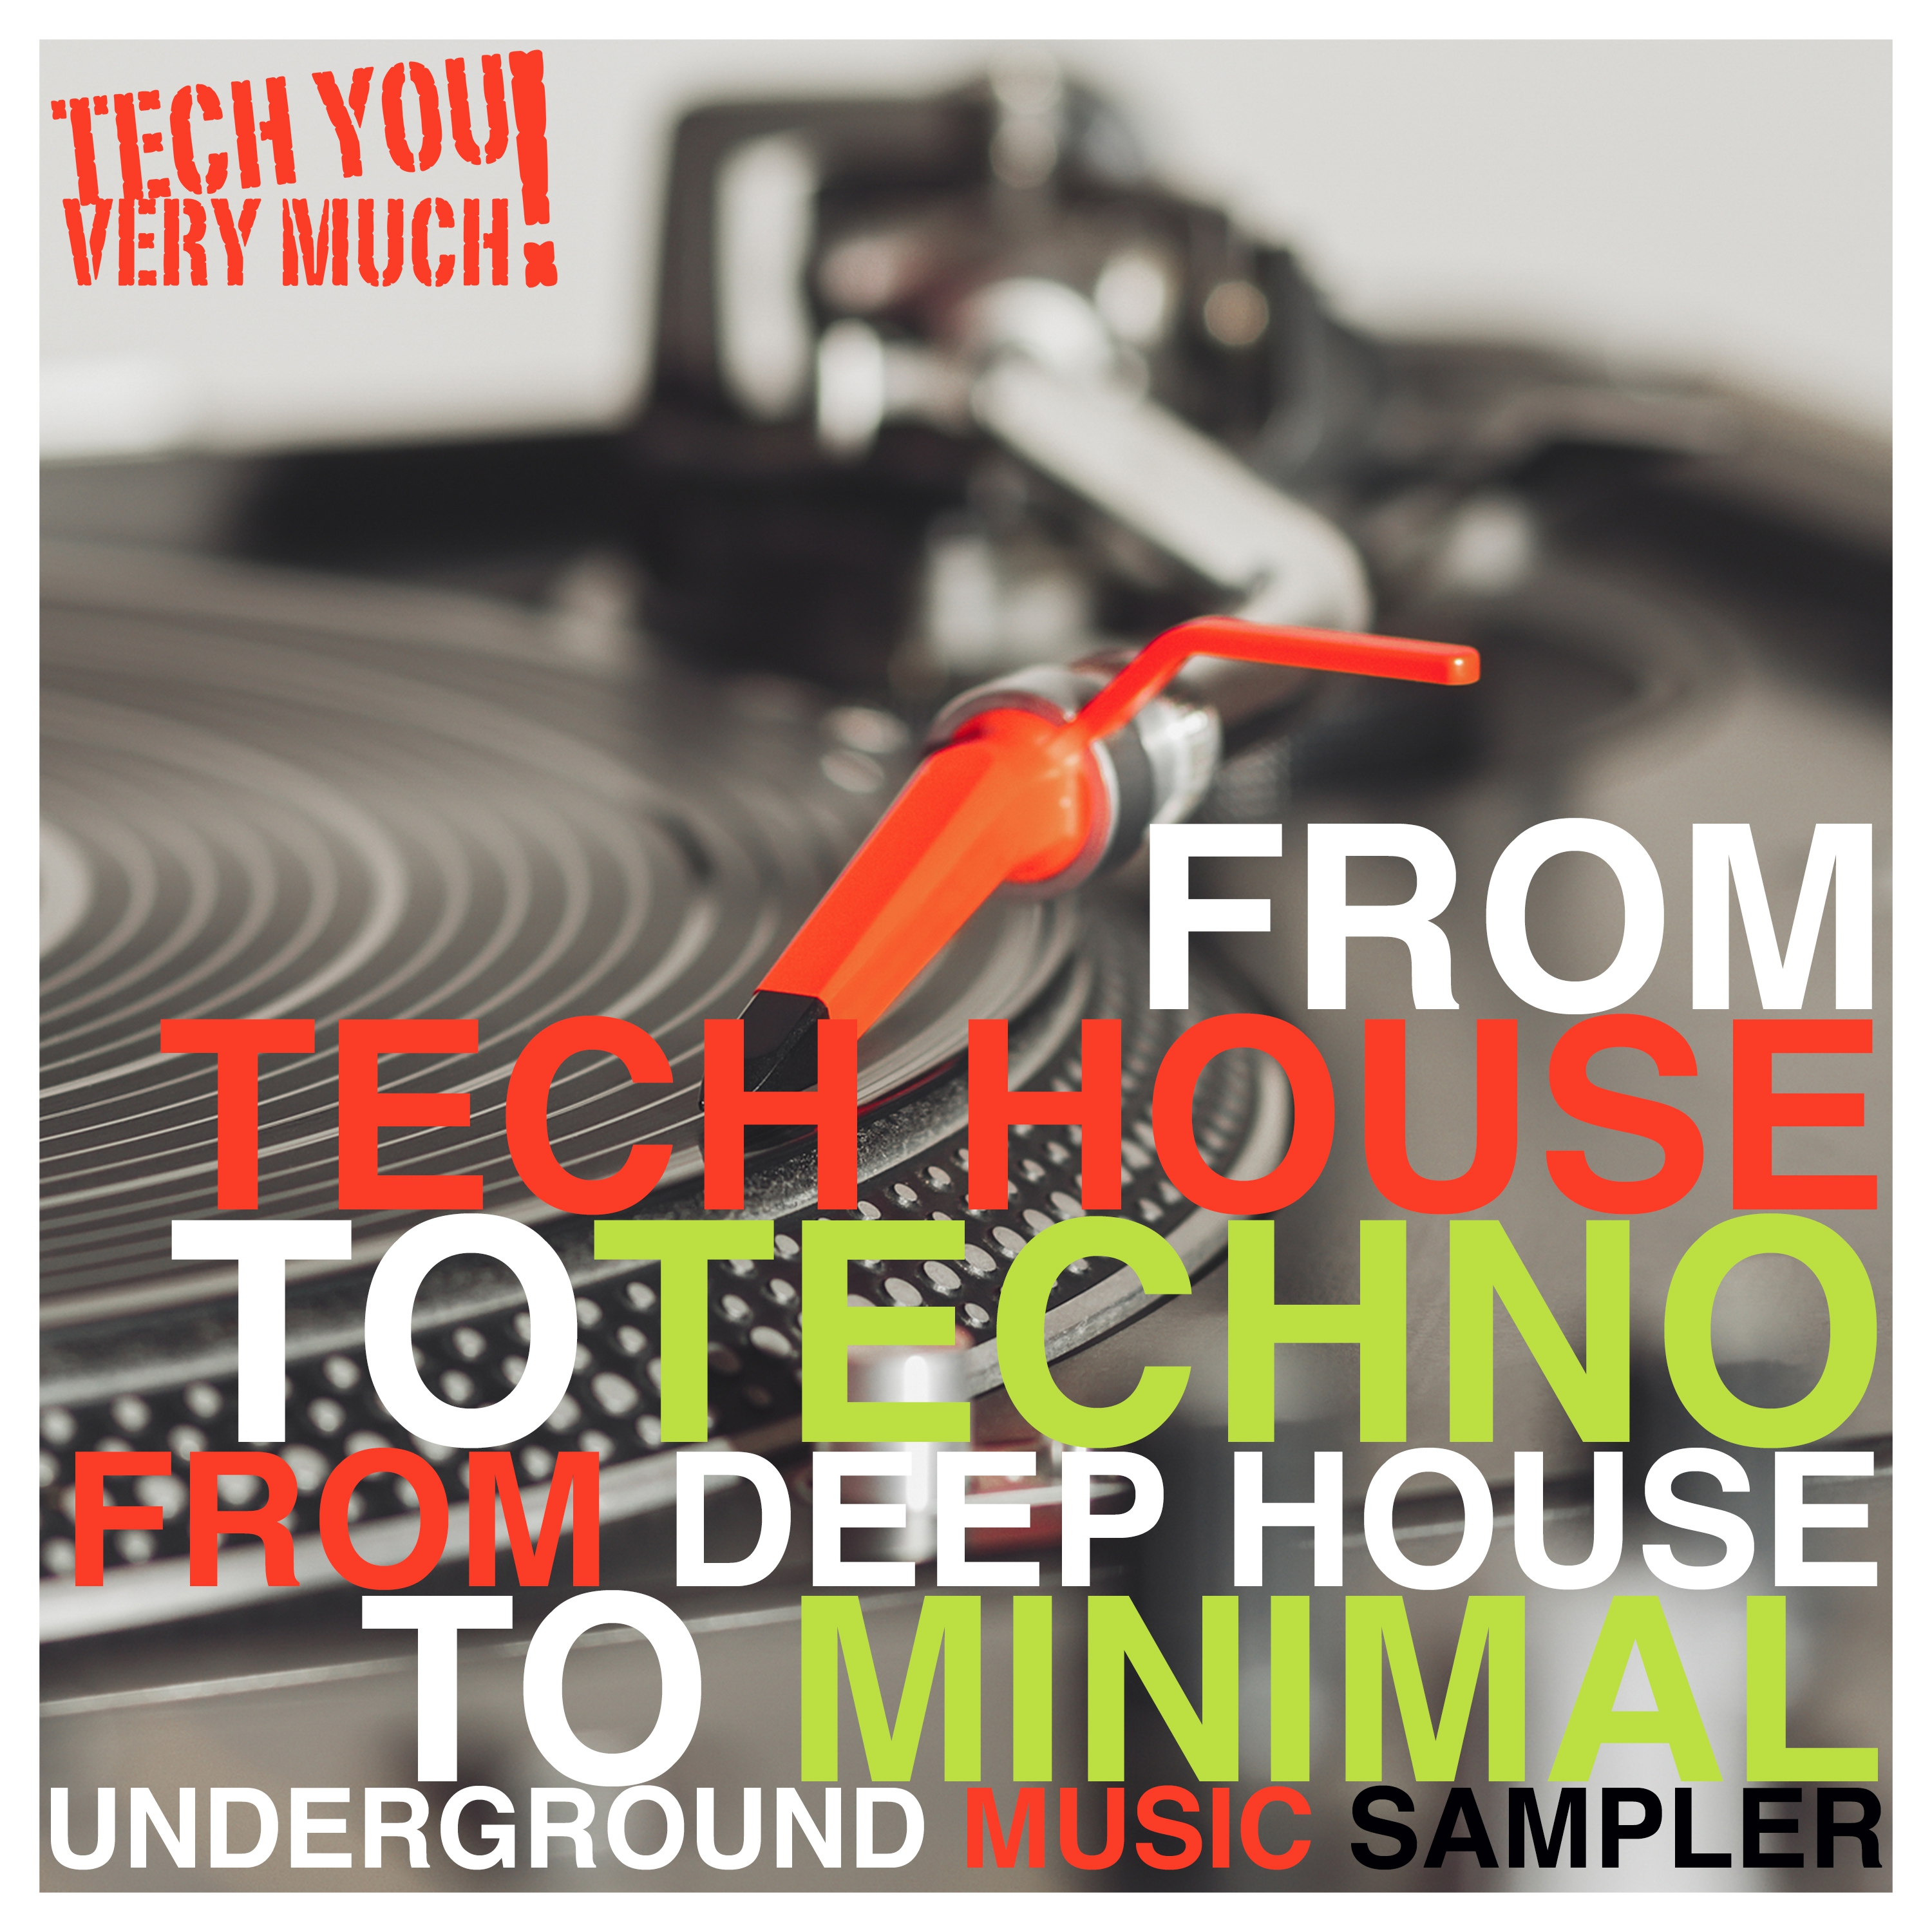 From Tech House to Techno, From Deep House to Minimal (Underground Music Sampler)